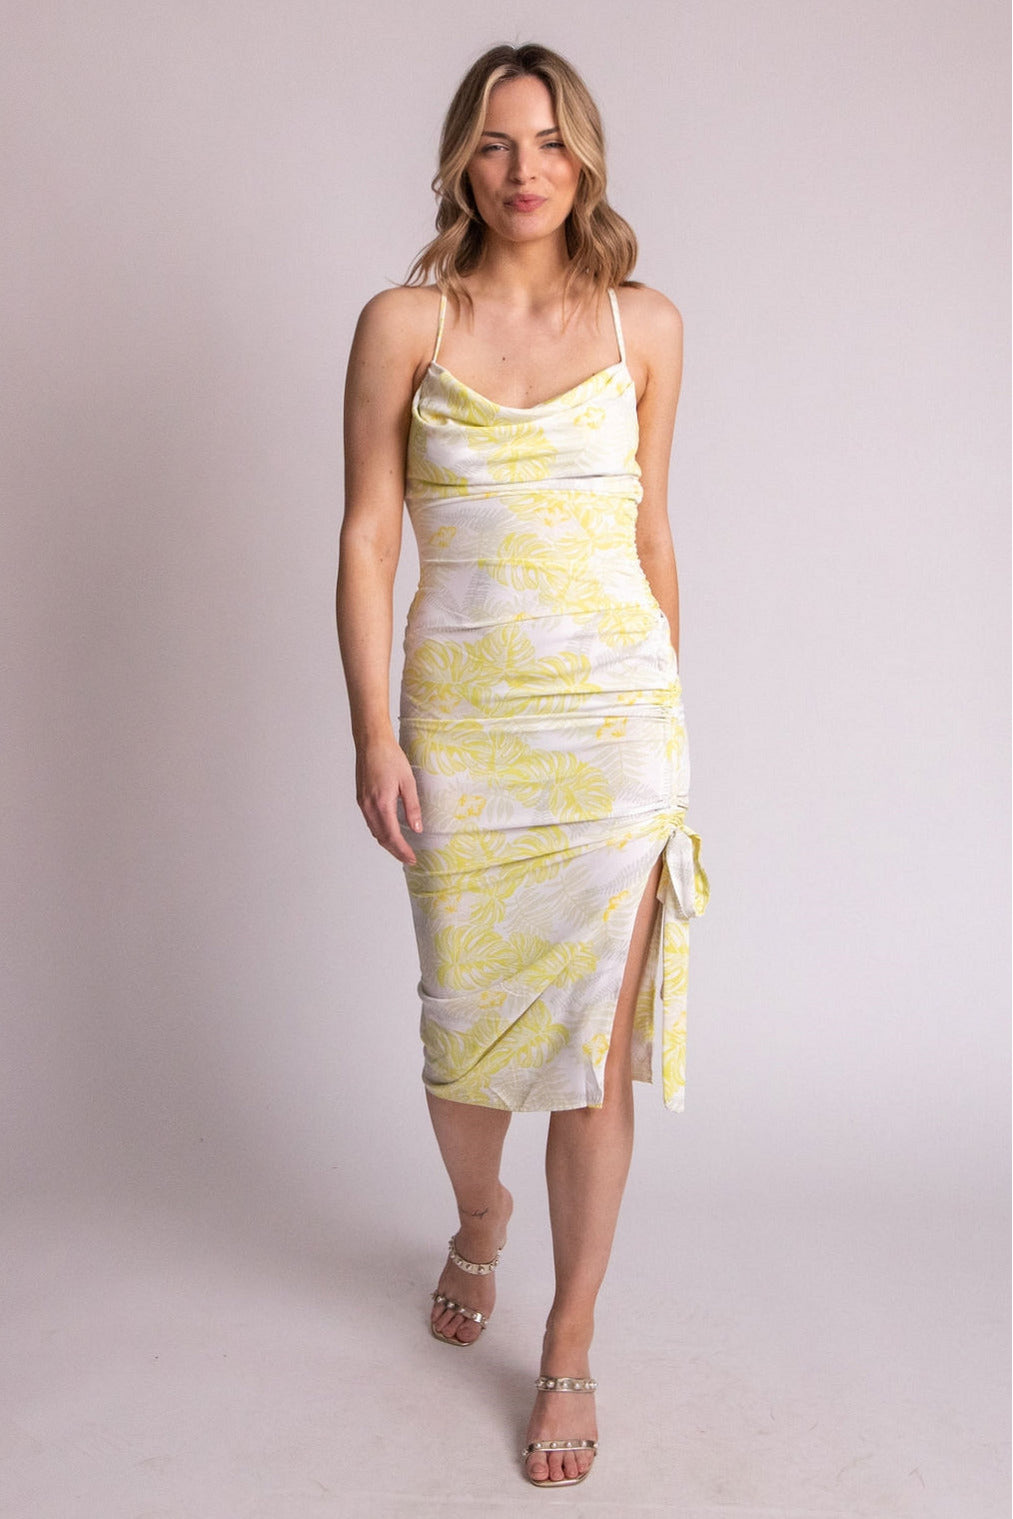 Le Tropical Yellow Floral Rouched Dress - Expressive Collective CO.